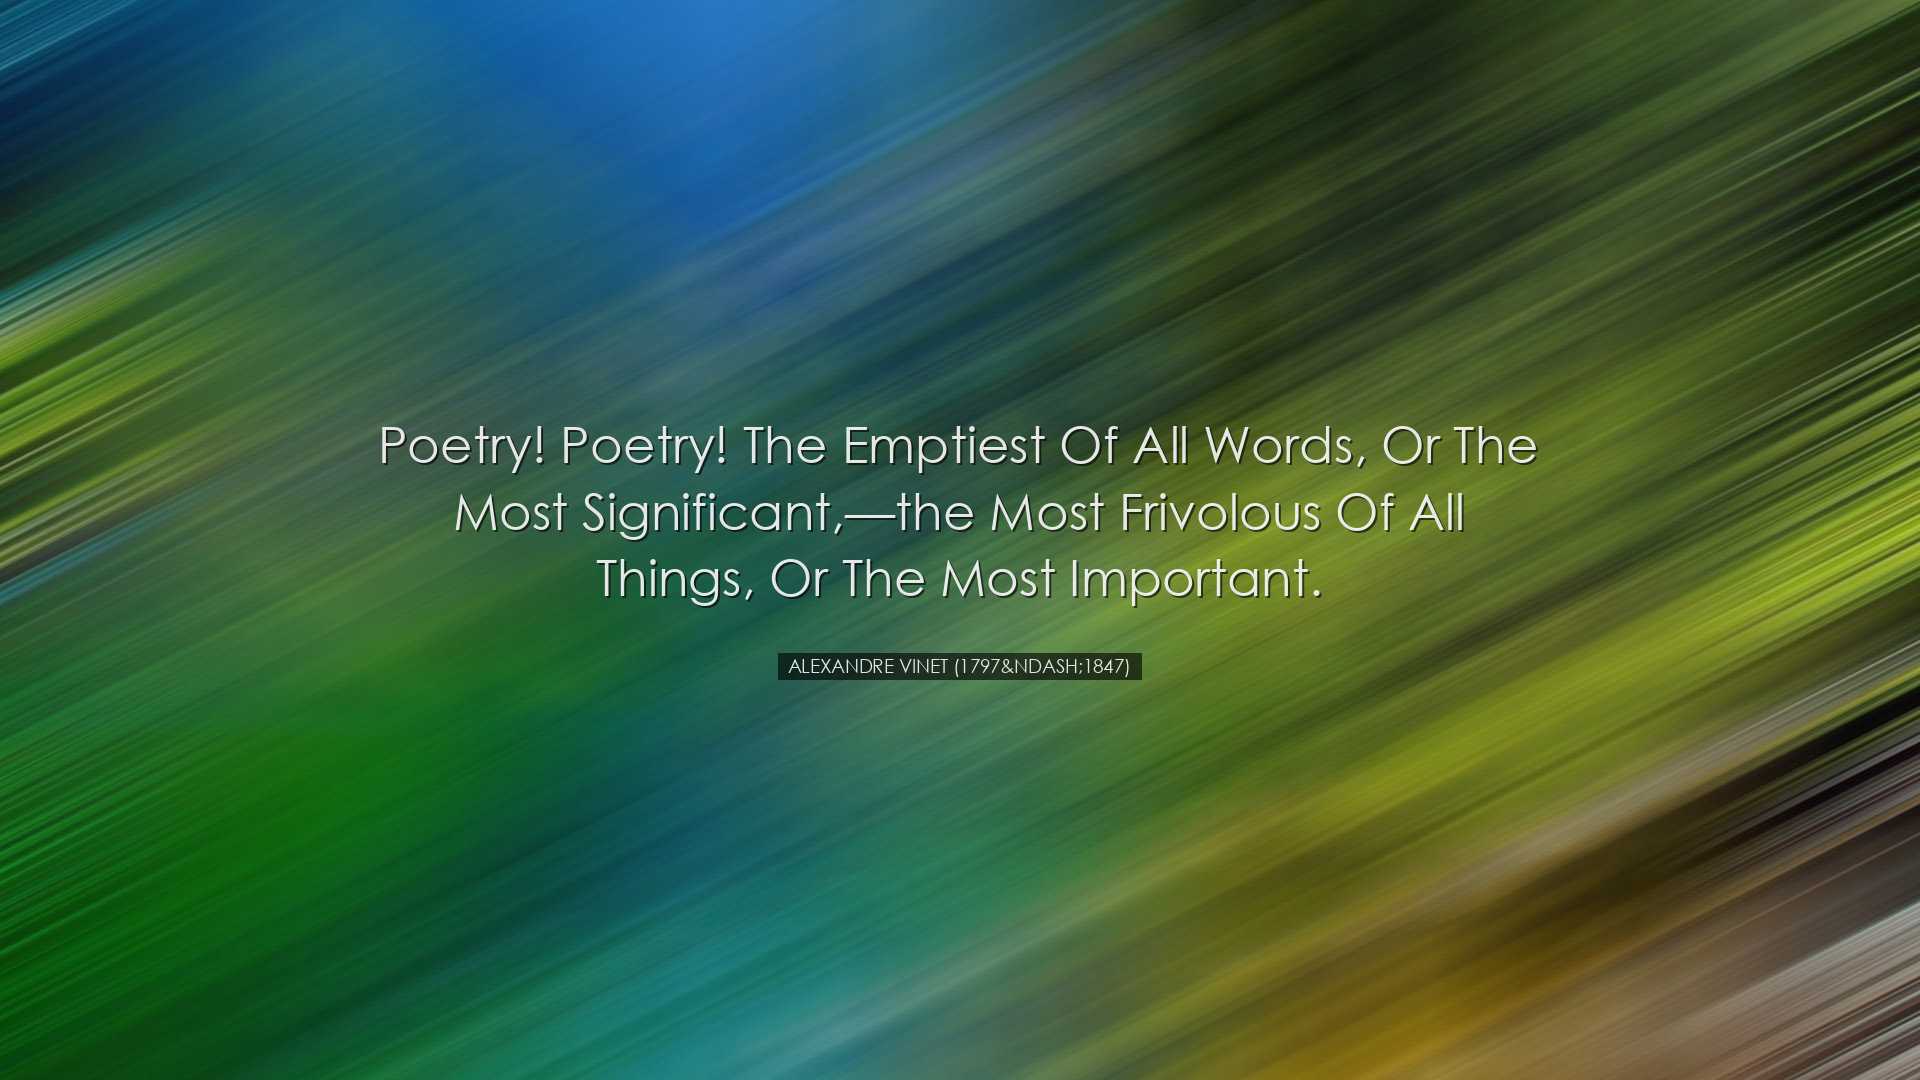 Poetry! poetry! the emptiest of all words, or the most significant